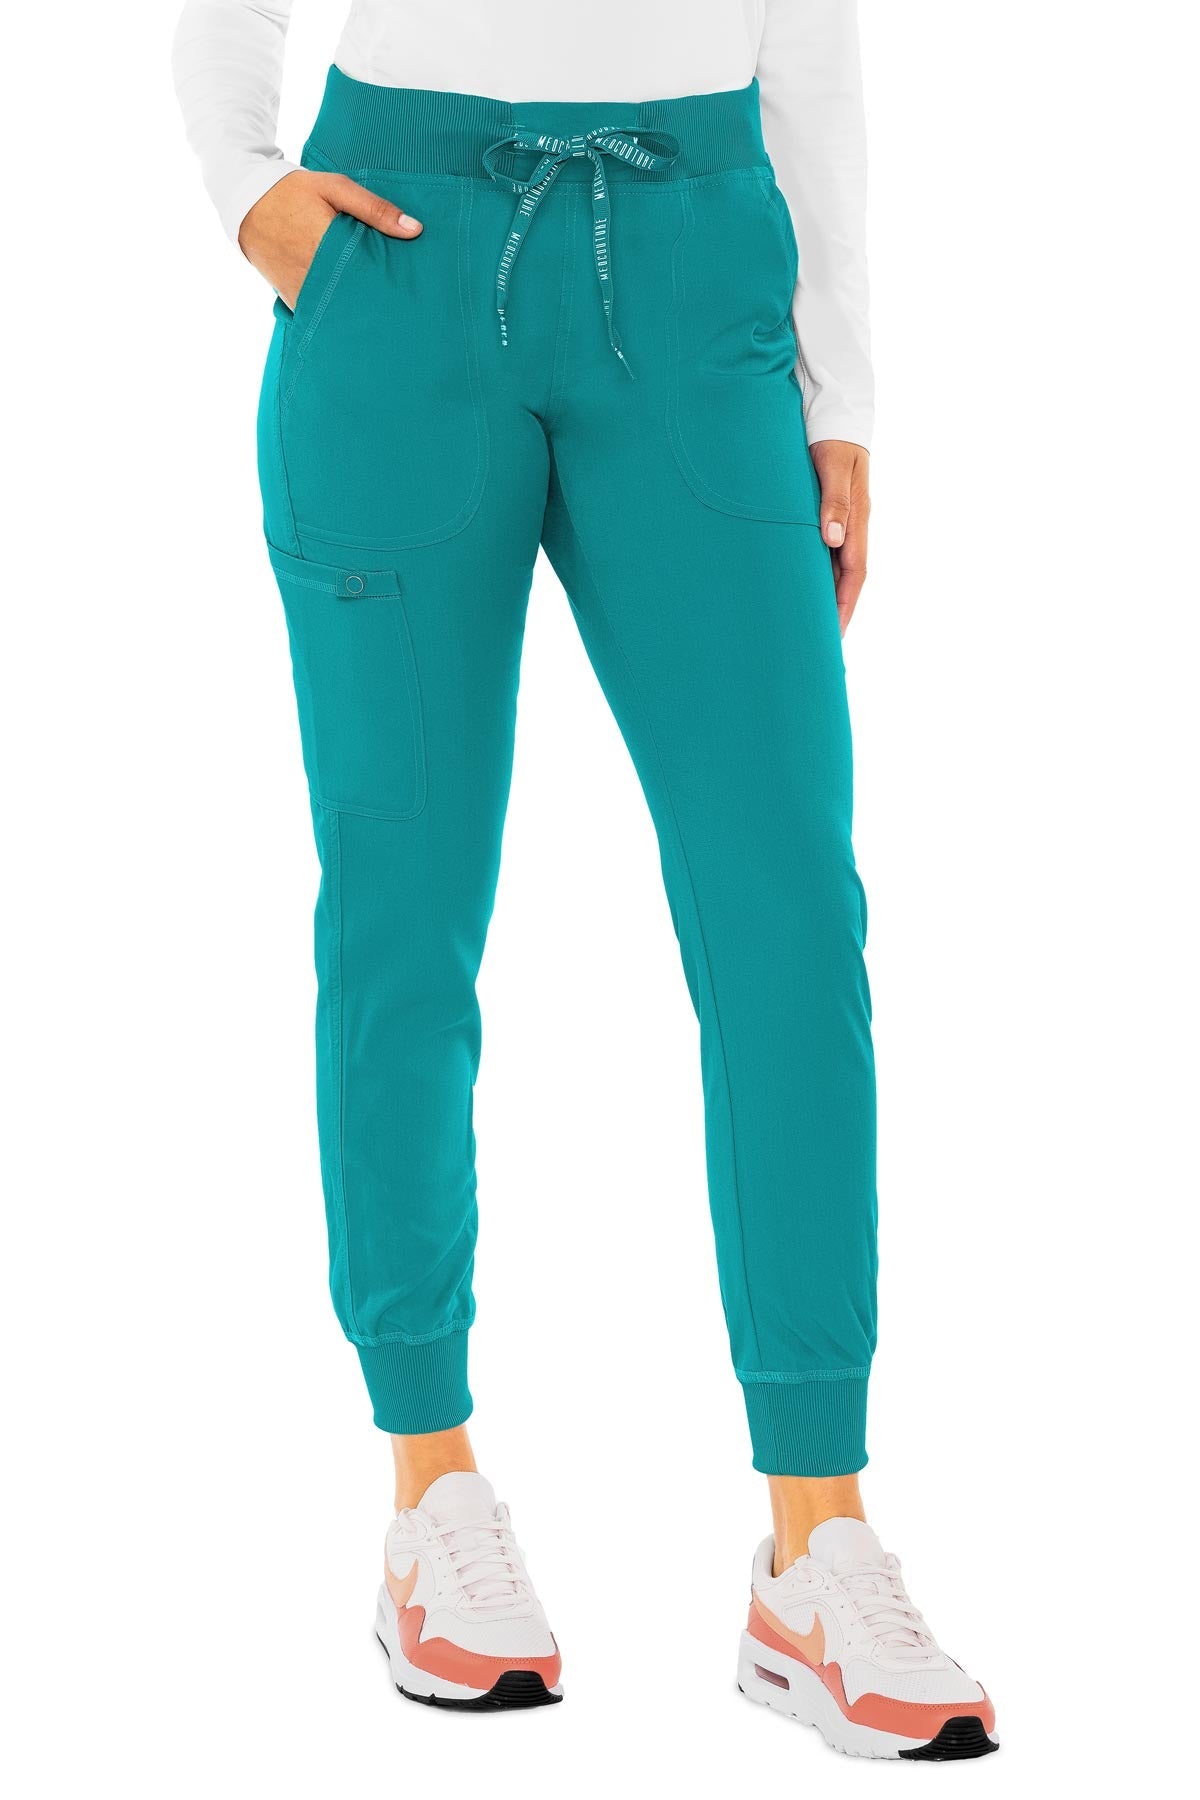 Med Couture Teal Blue PANT